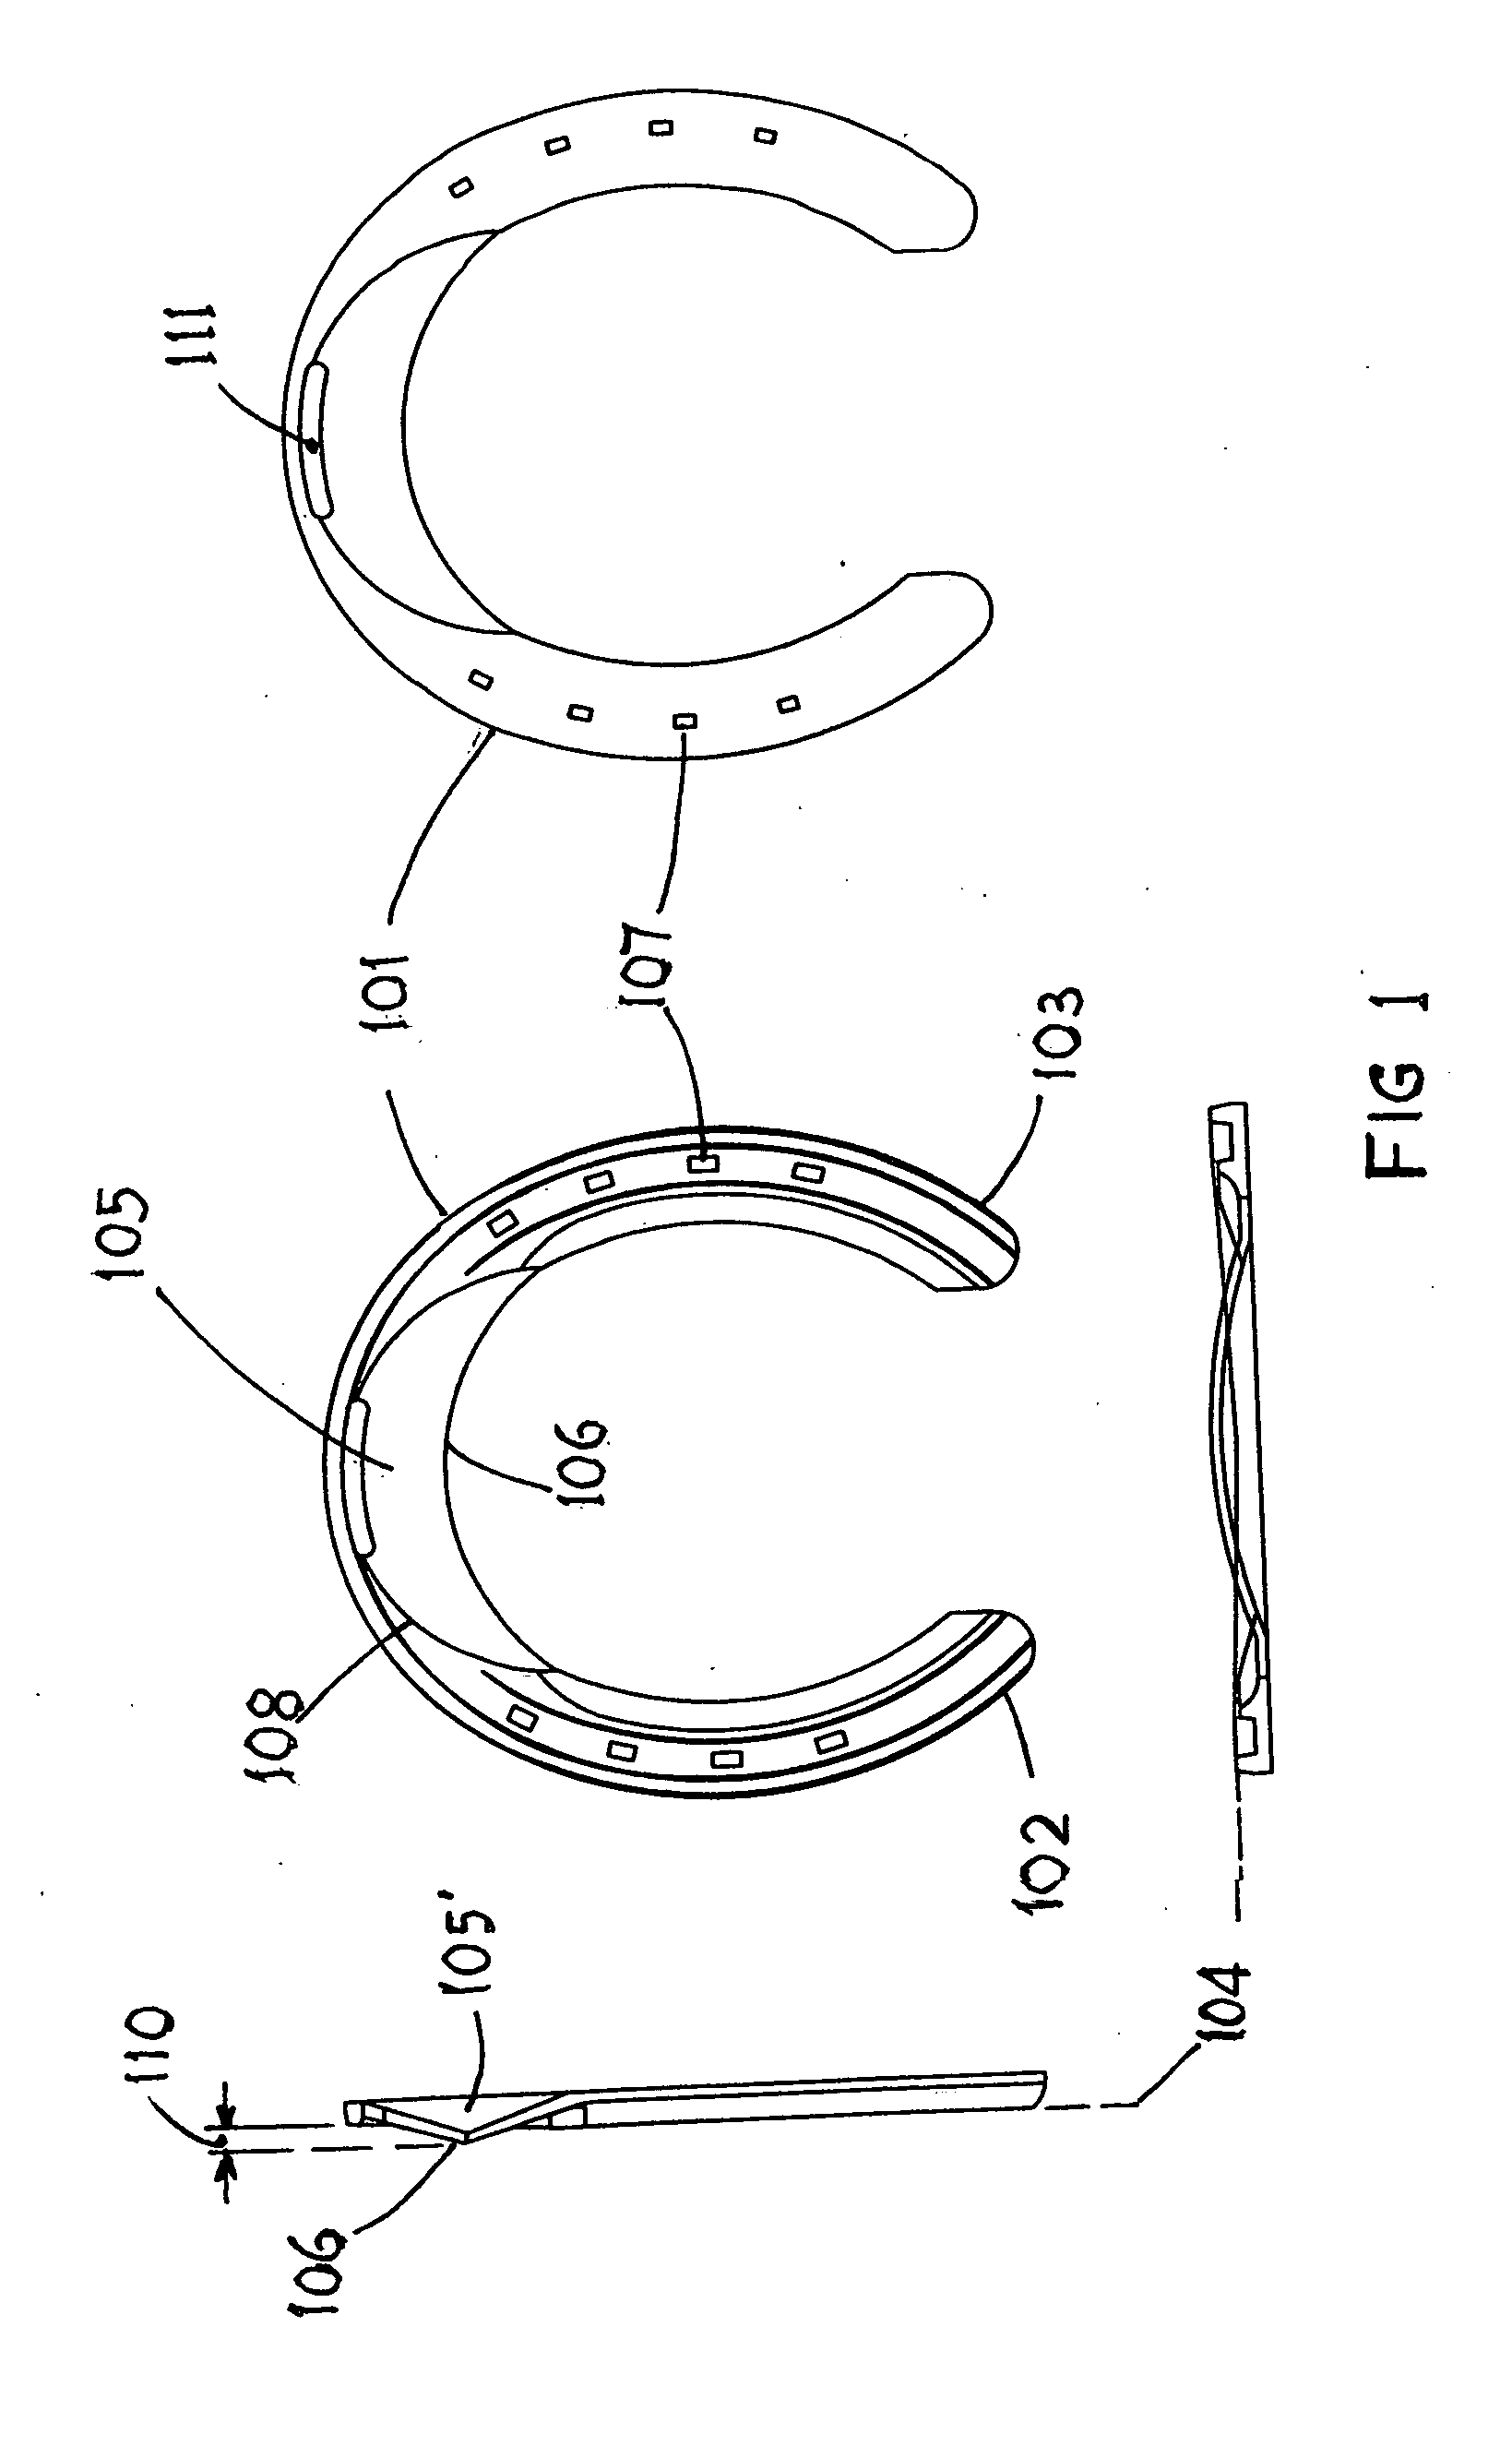 Horse shoe with splaying feature and flexibility